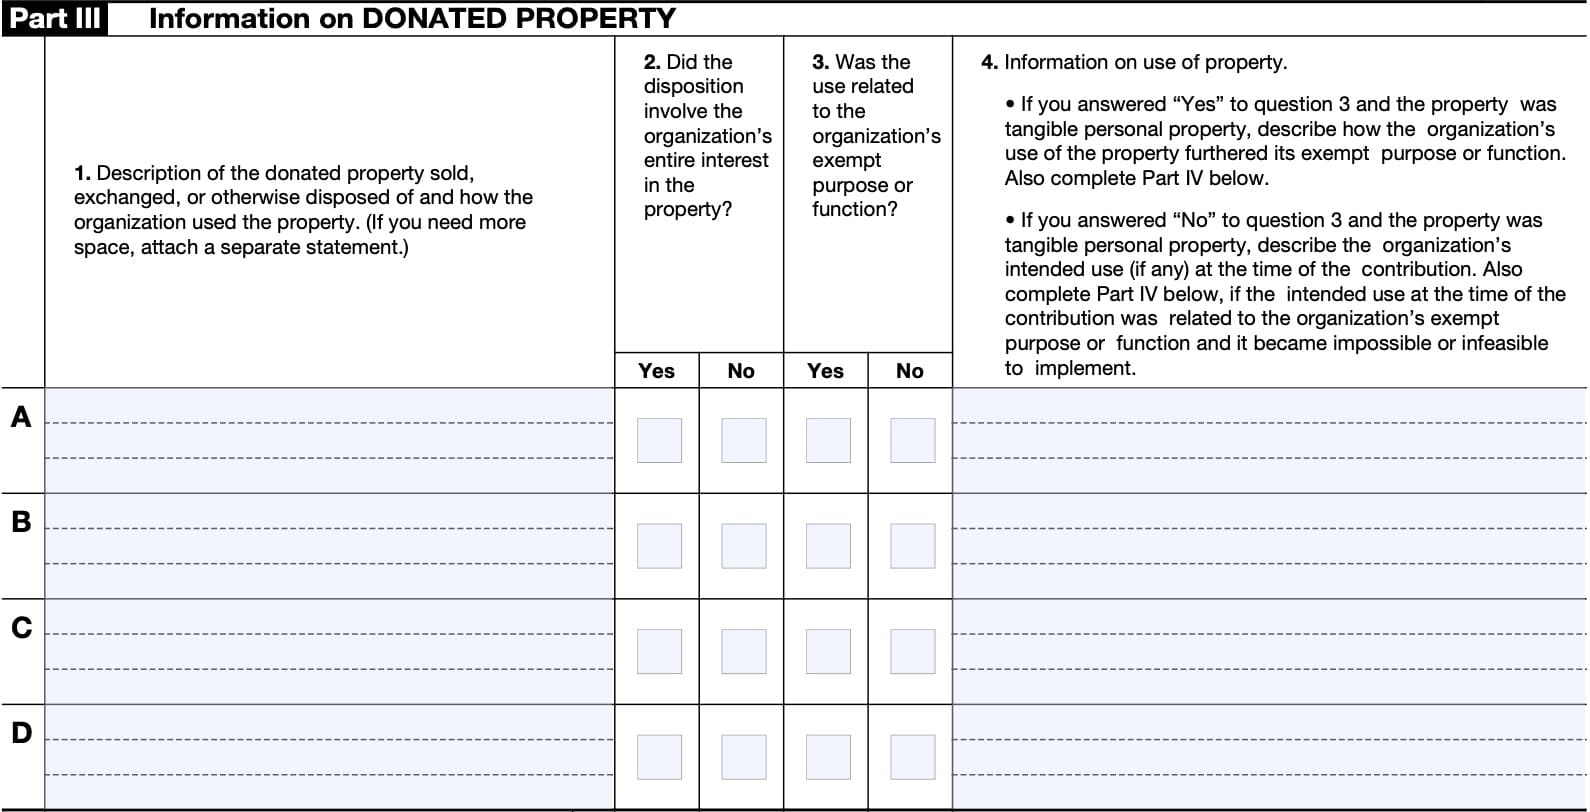 irs form 8282, part III: information on donated property